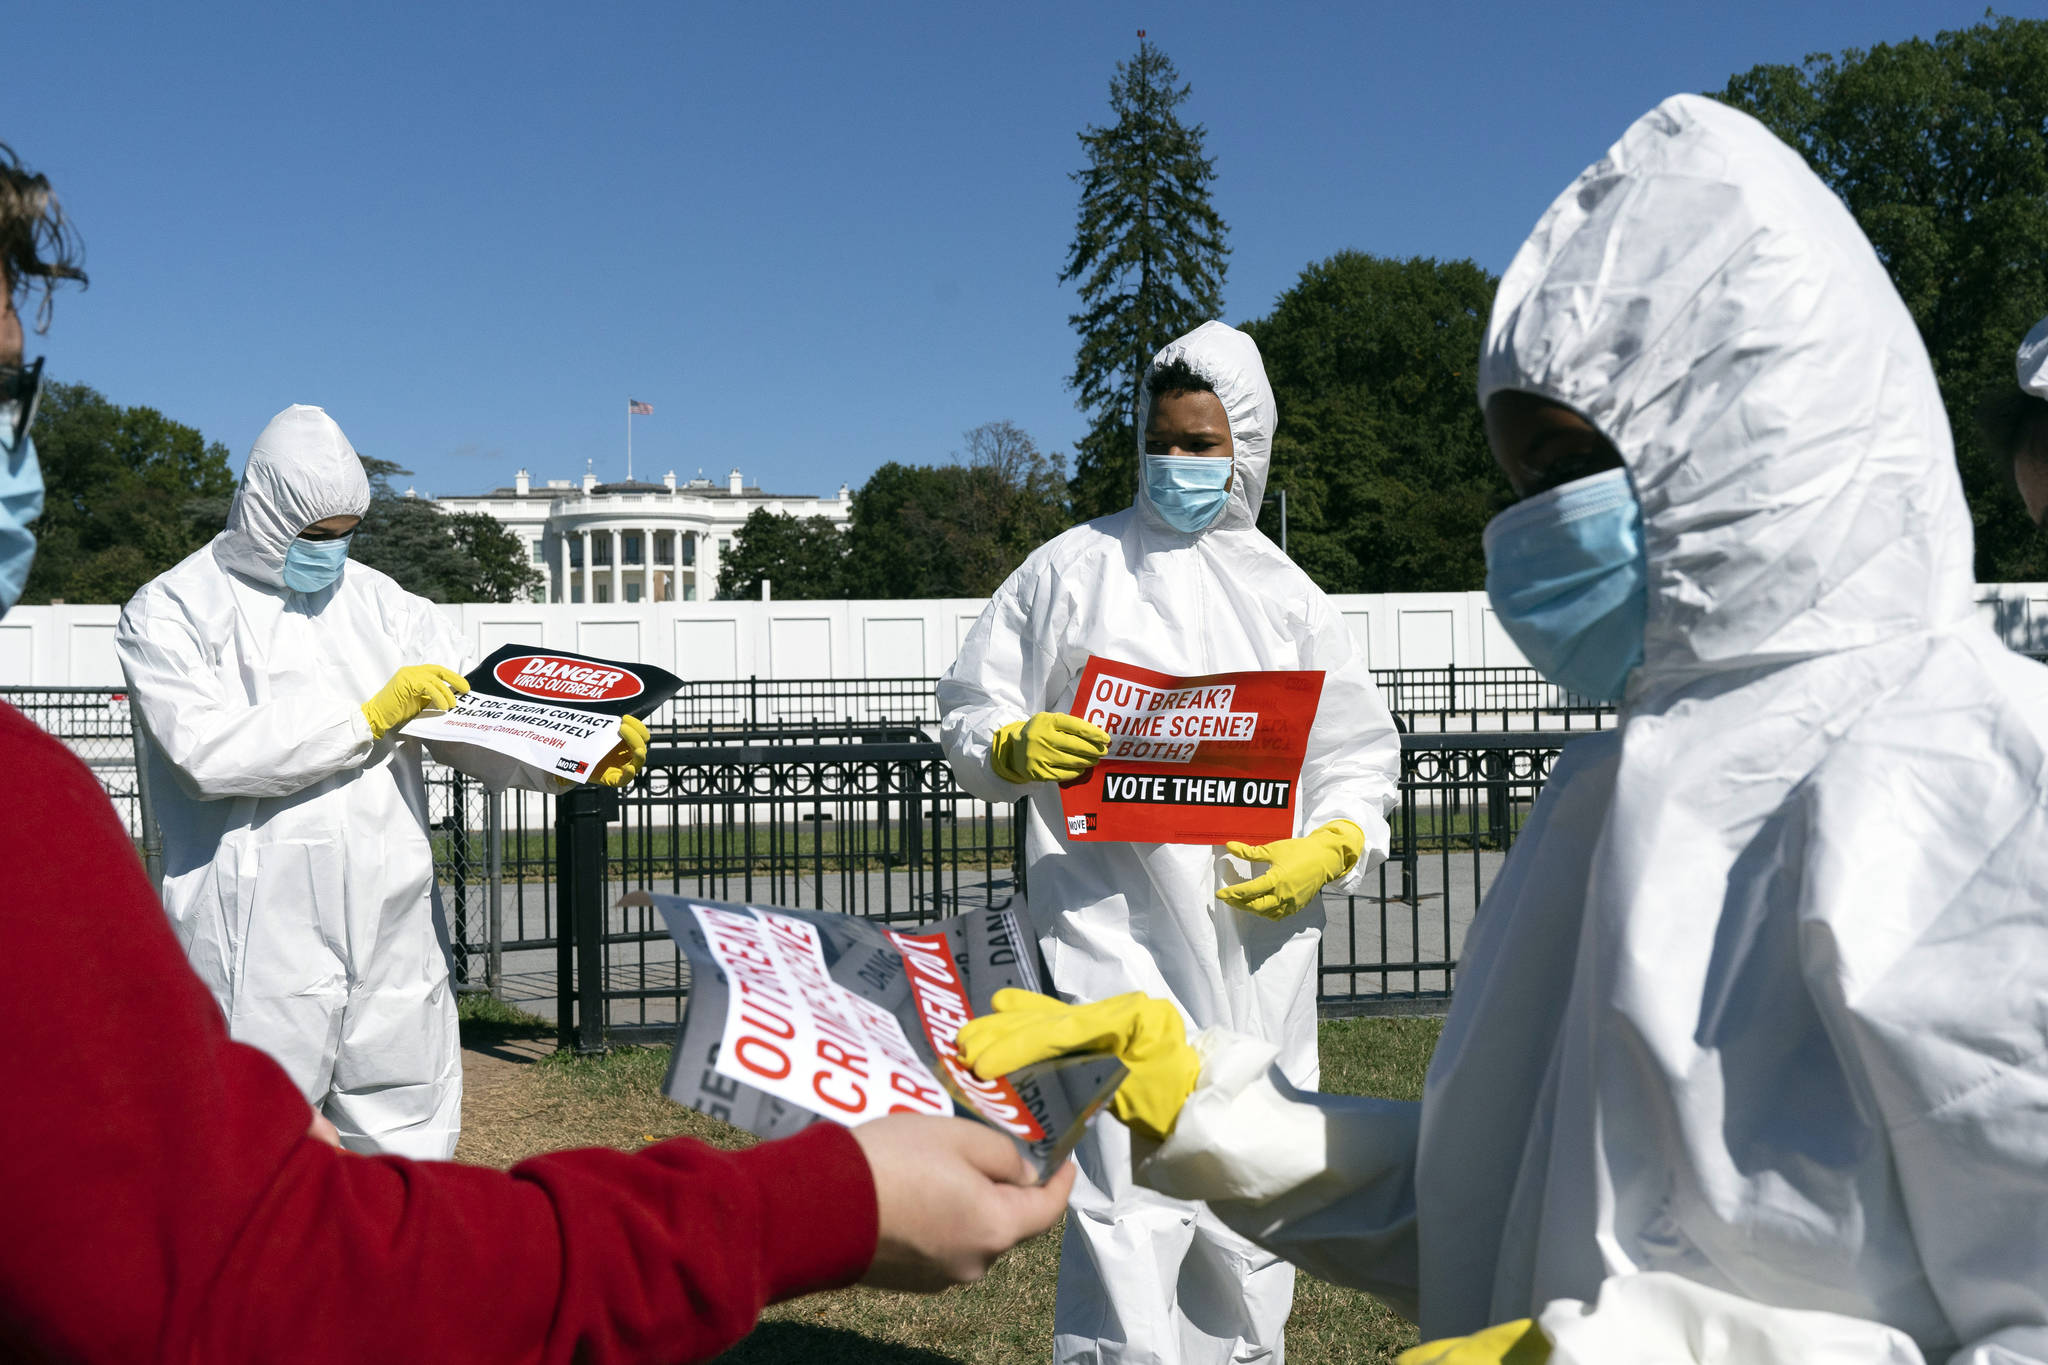 A group protests the ongoing outbreak of coronavirus in the White House, Thursday, Oct. 8, 2020, outside the White House in Washington. (AP Photo / Jacquelyn Martin)